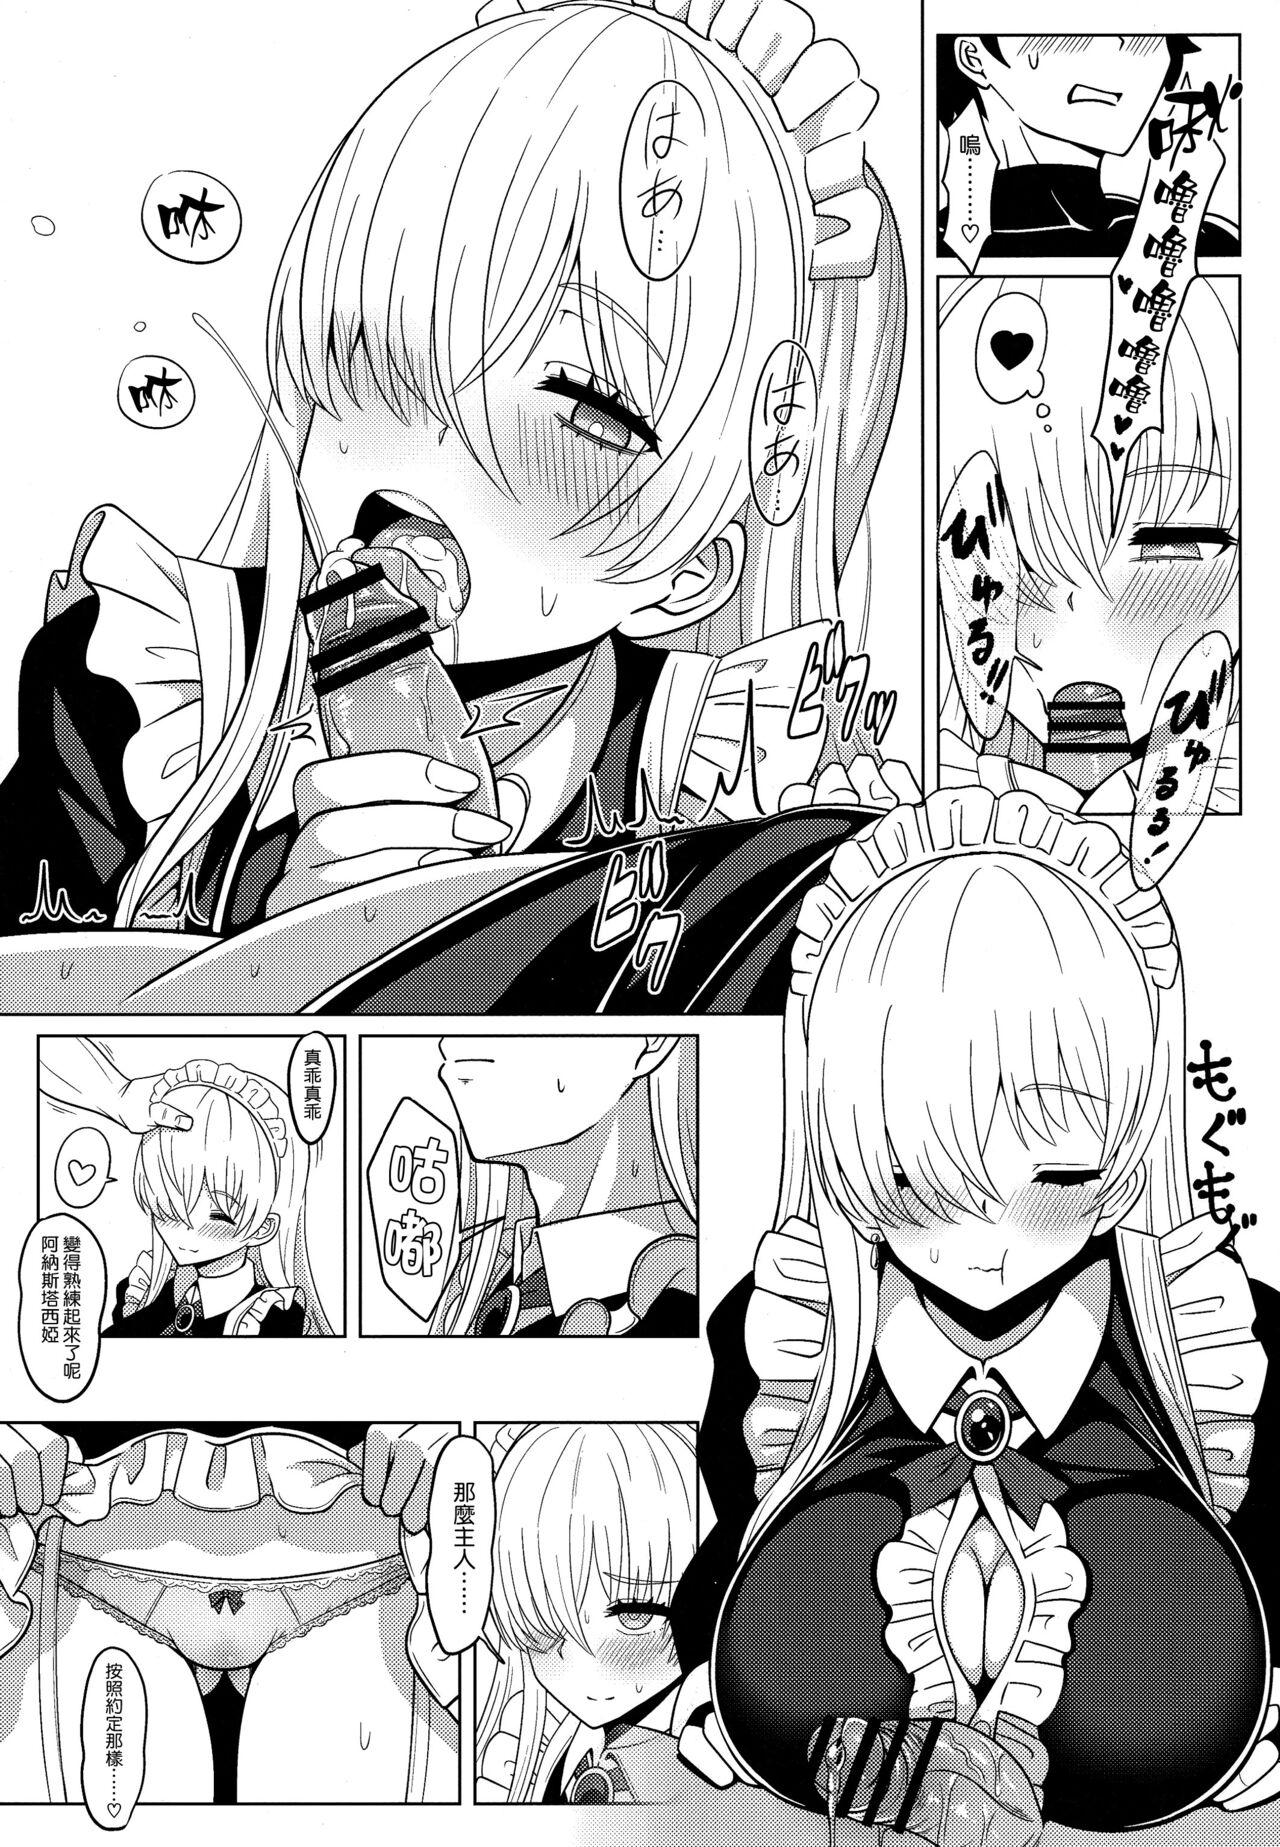 Webcams 皇女様と卵 - Fate grand order Milfporn - Page 9